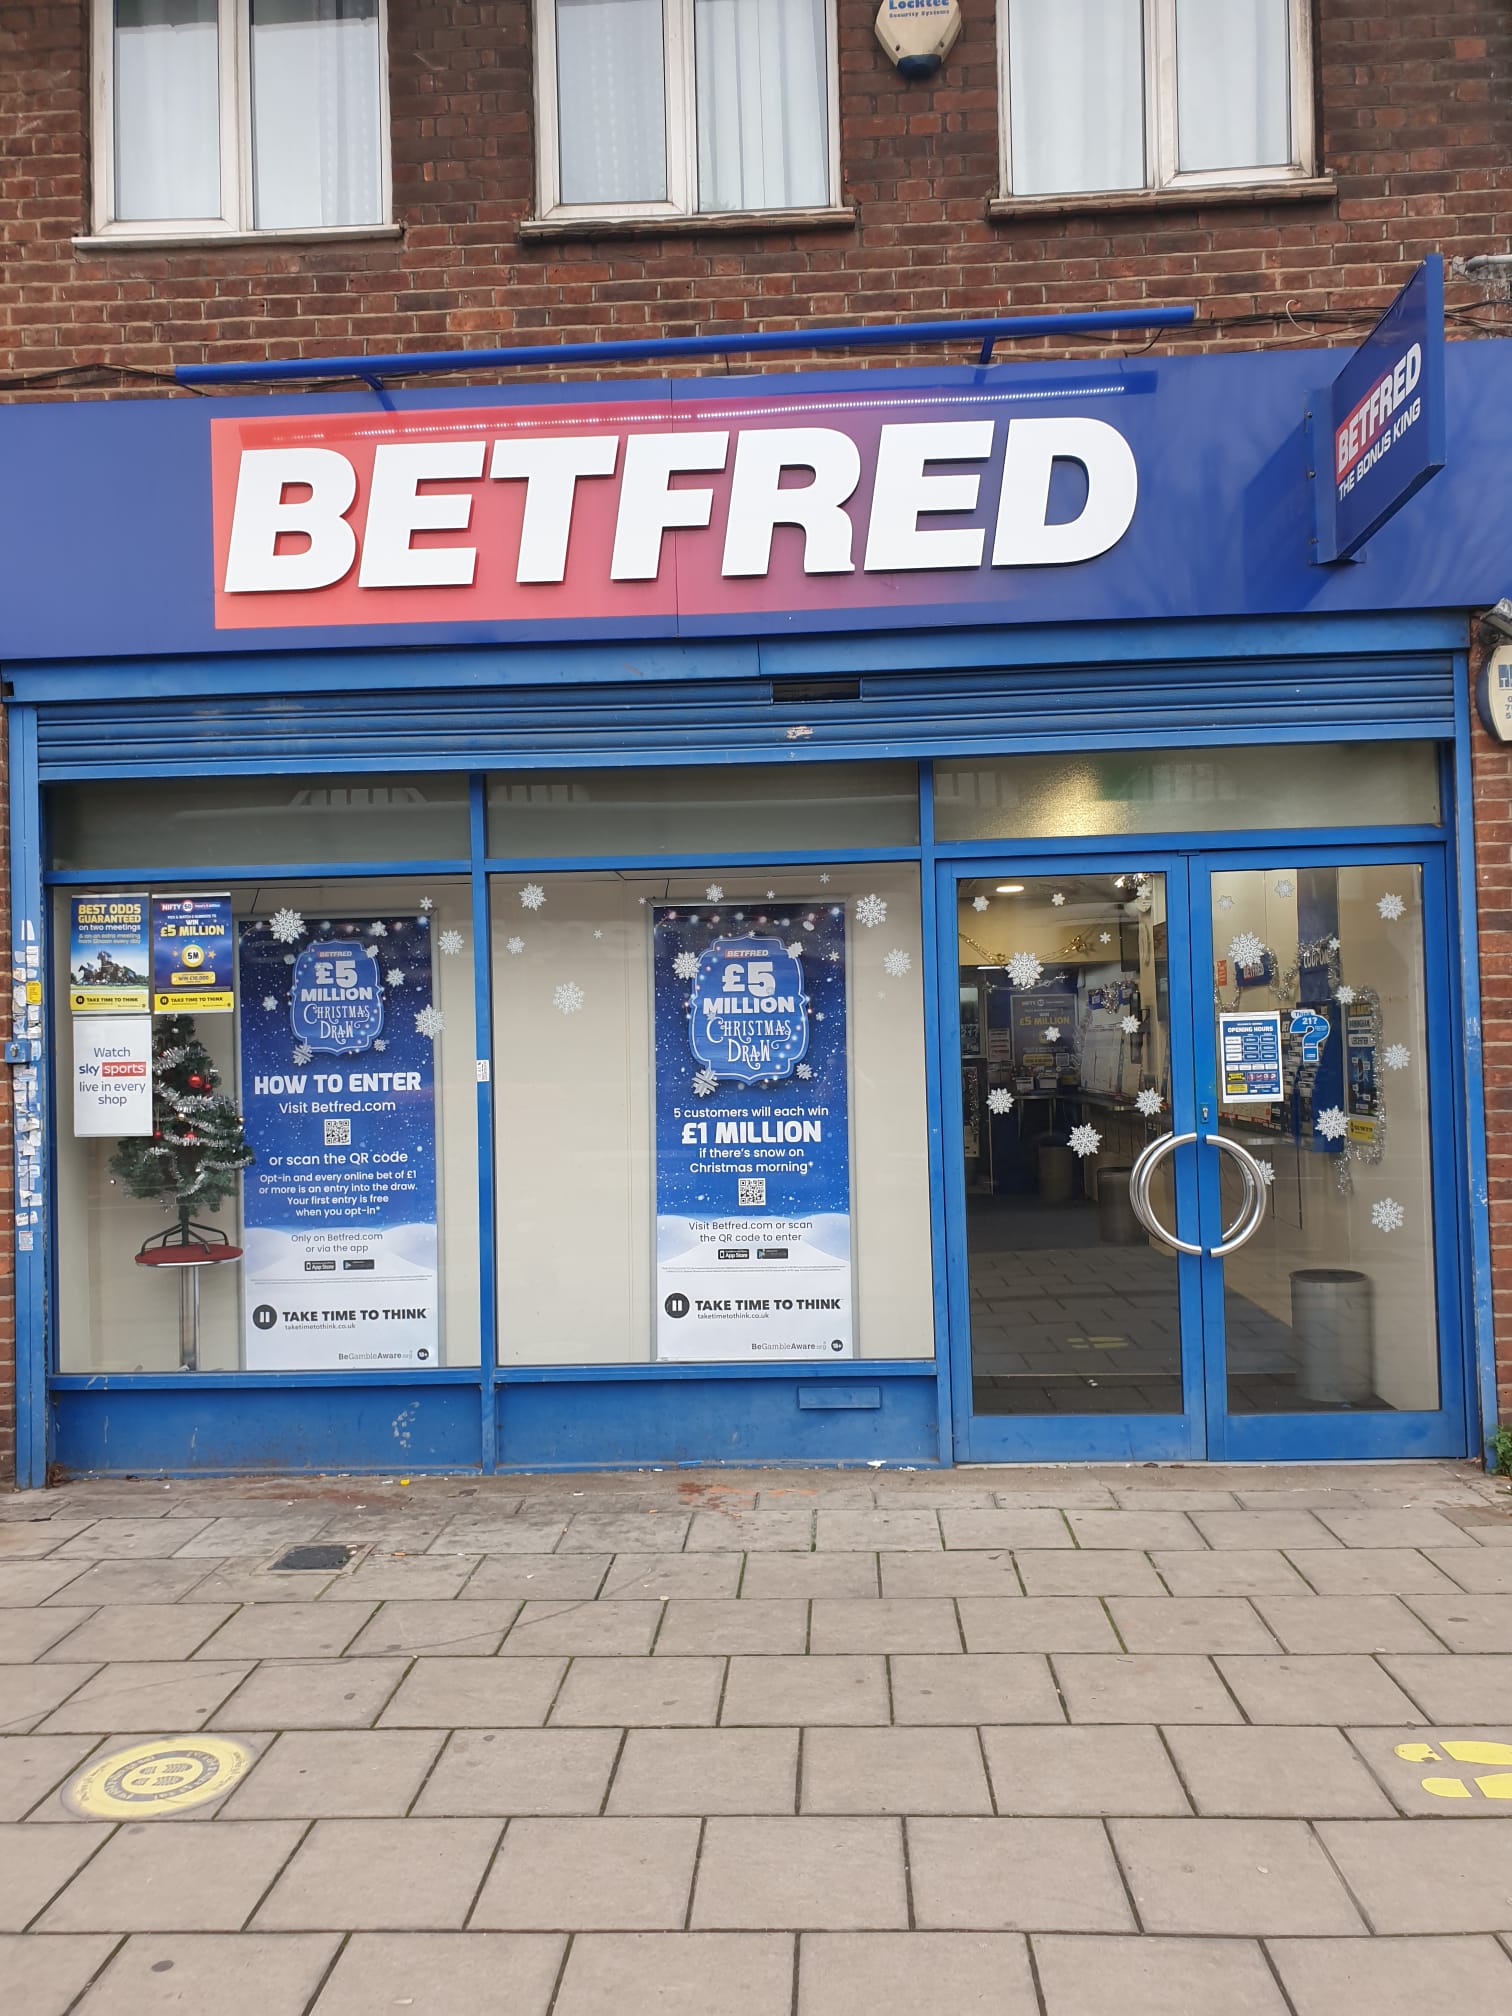 Shop Front Betfred Ilford 08000 320878